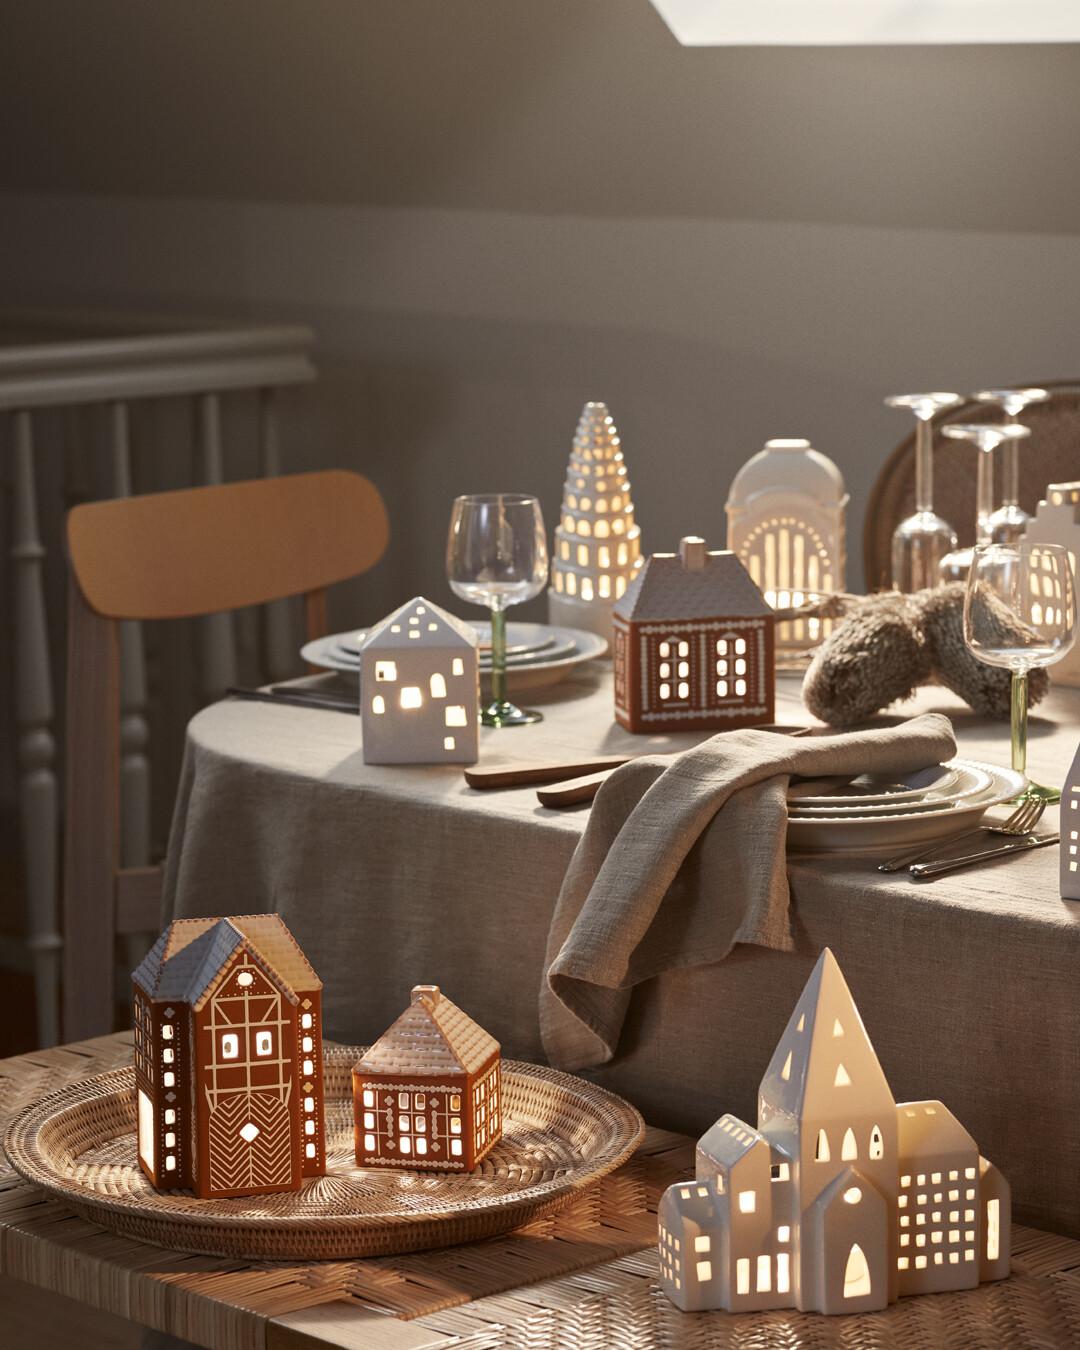 class="content__text"
 With less than three months till Christmas, we are slowly starting to think about decorations... Why not decorate the window sill or table with the stunning Urbania or our new Gingerbread light houses? 🍪

Link in bio! 

 #kähler #kählerdesign #urbania #gingerbread #lighthouse #christmasdecoration 
 